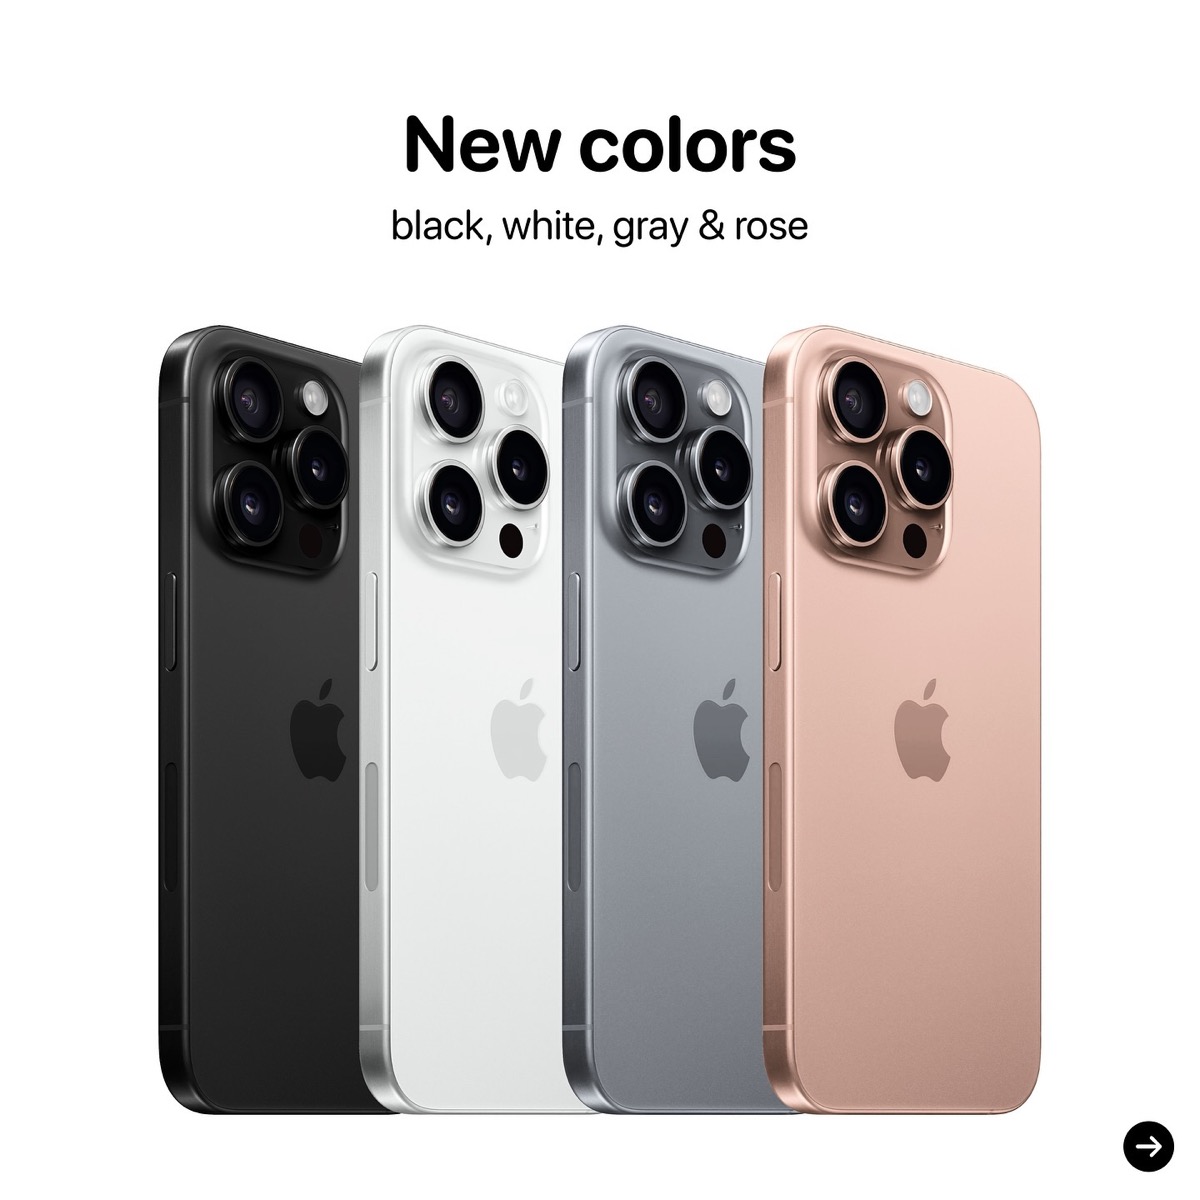 iPhone16 Pro colors_1200